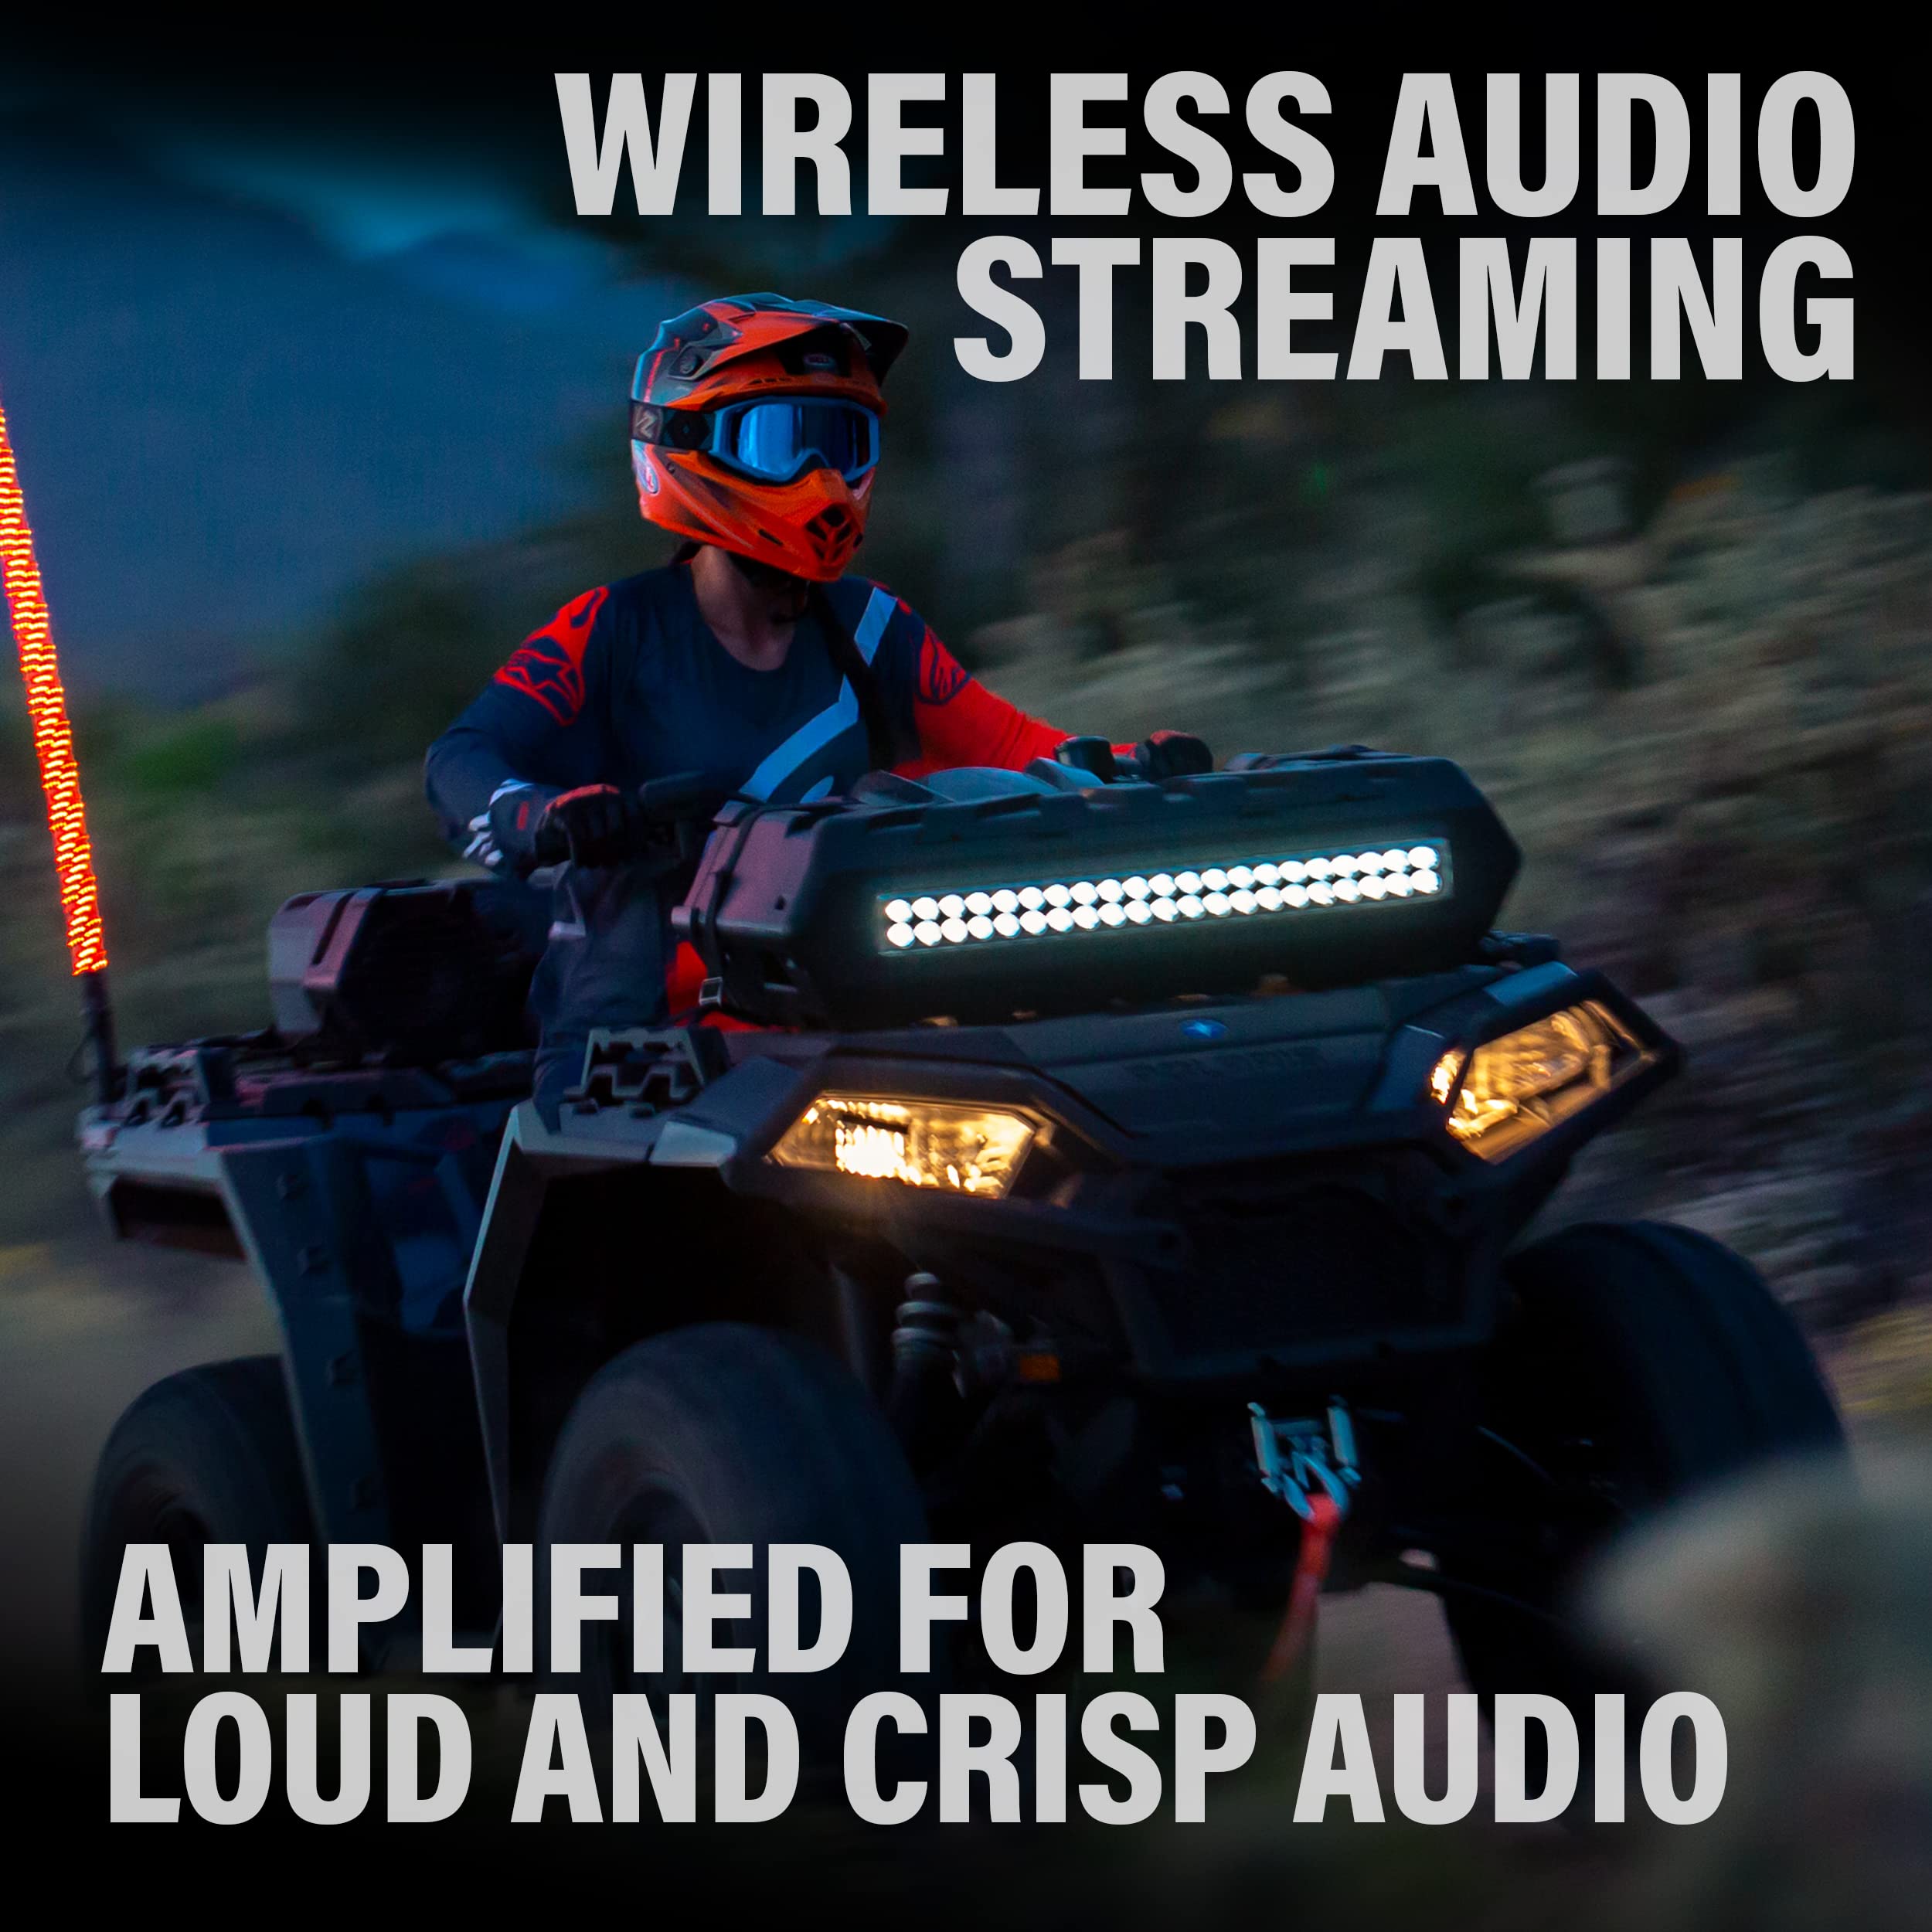 BOSS Audio Systems ATV95LRGB ATV UTV Weatherproof Sound System - 8 Inch Speakers, 1.5 Inch Tweeters, Amplified, Bluetooth Remote, LED Light Bar, Storage Compartment, Easy Installation for 12V Vehicles